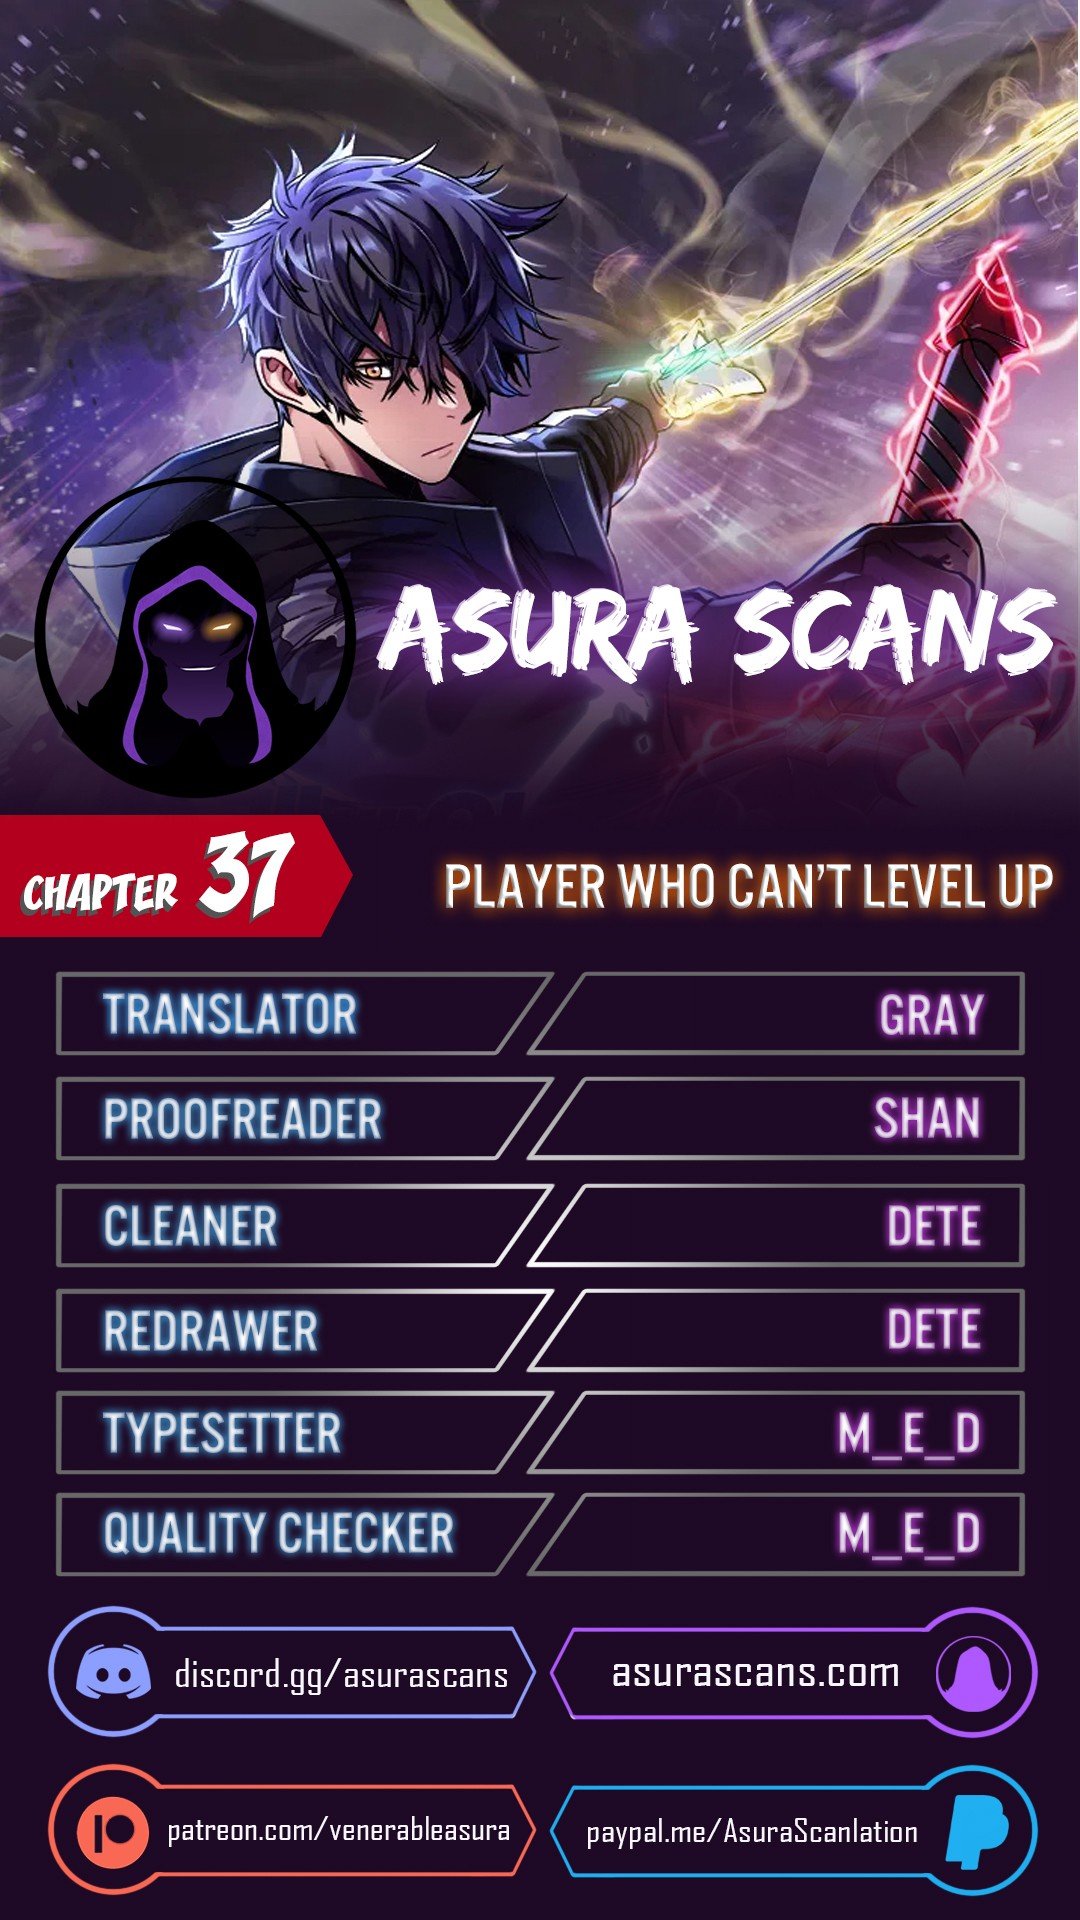 player-who-cant-level-up-chap-37-0